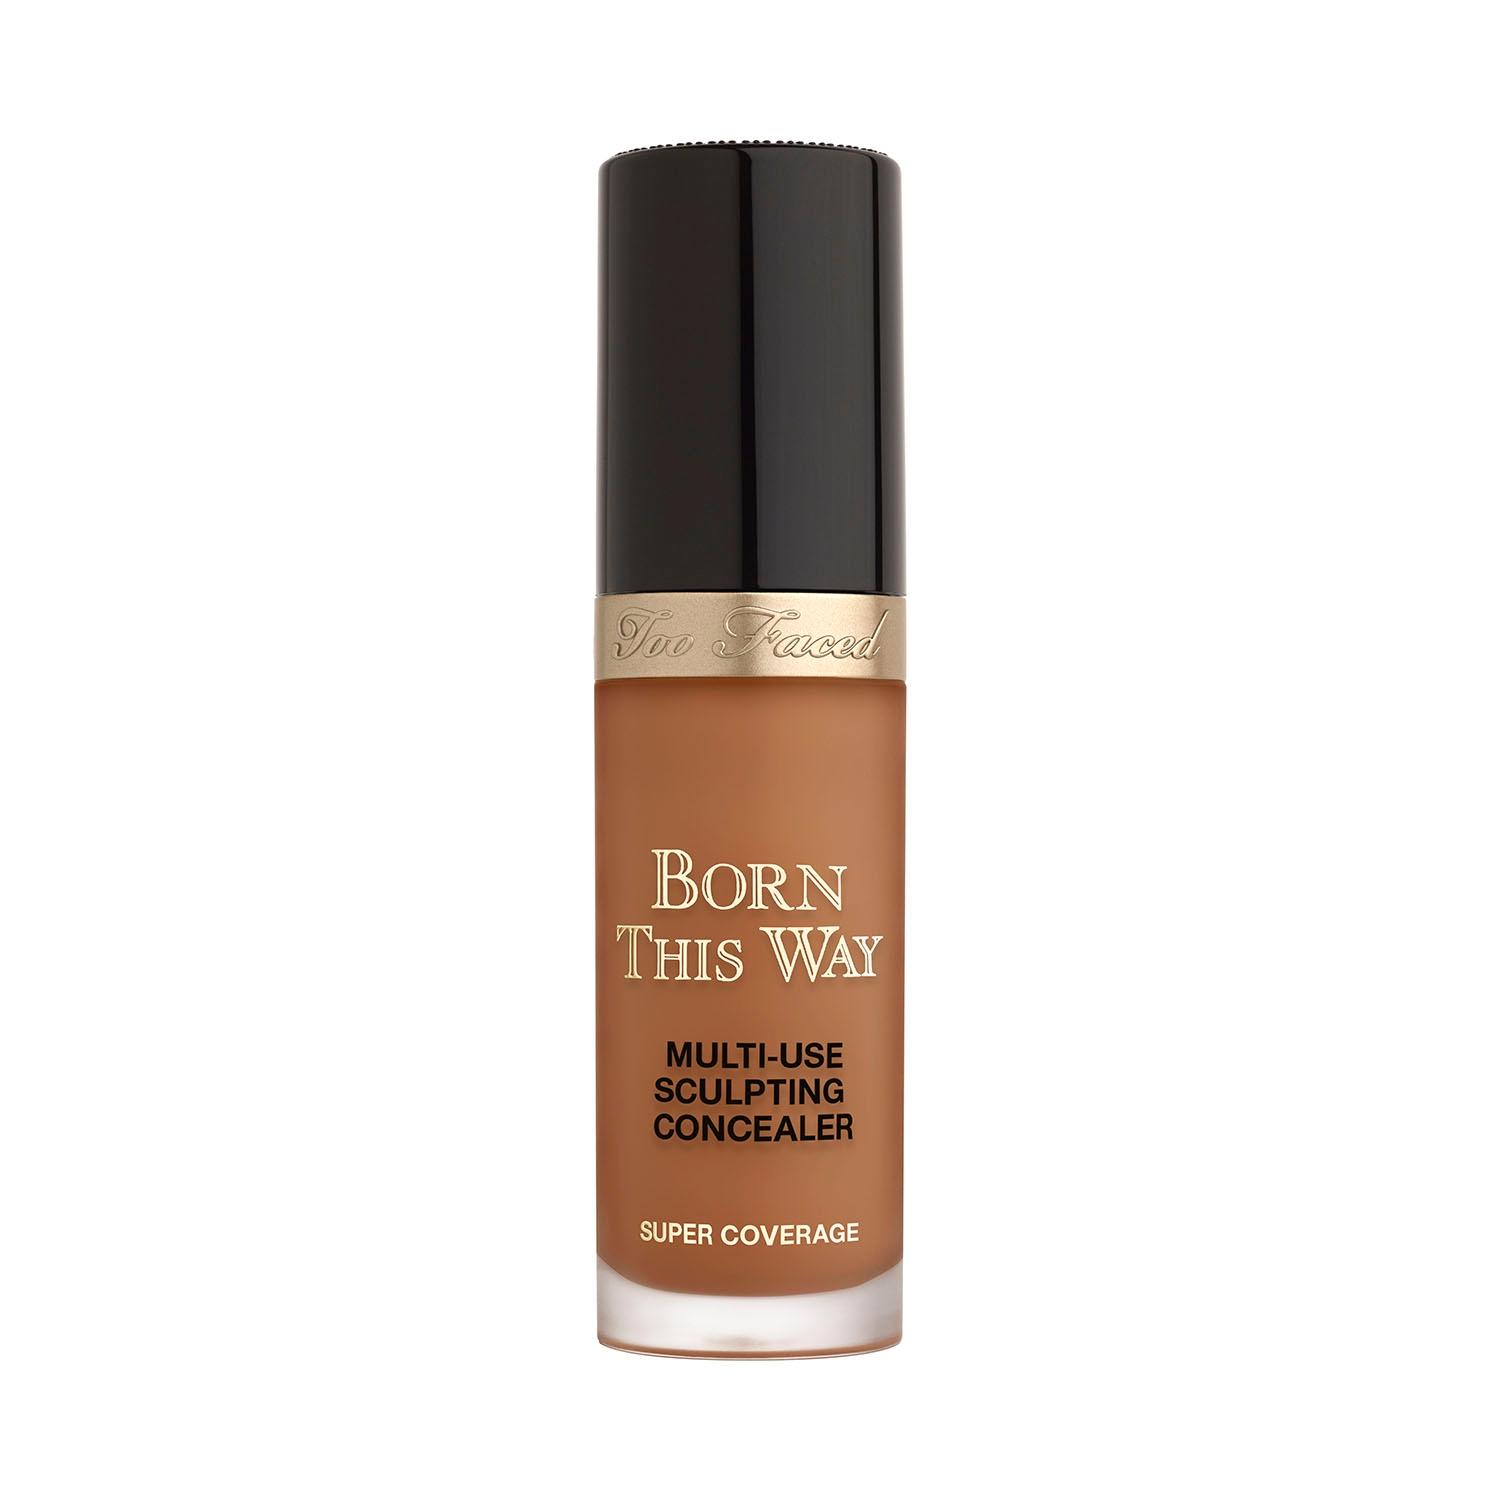 too faced born this way super coverage multi use sculpting concealer - chai (13.5ml)